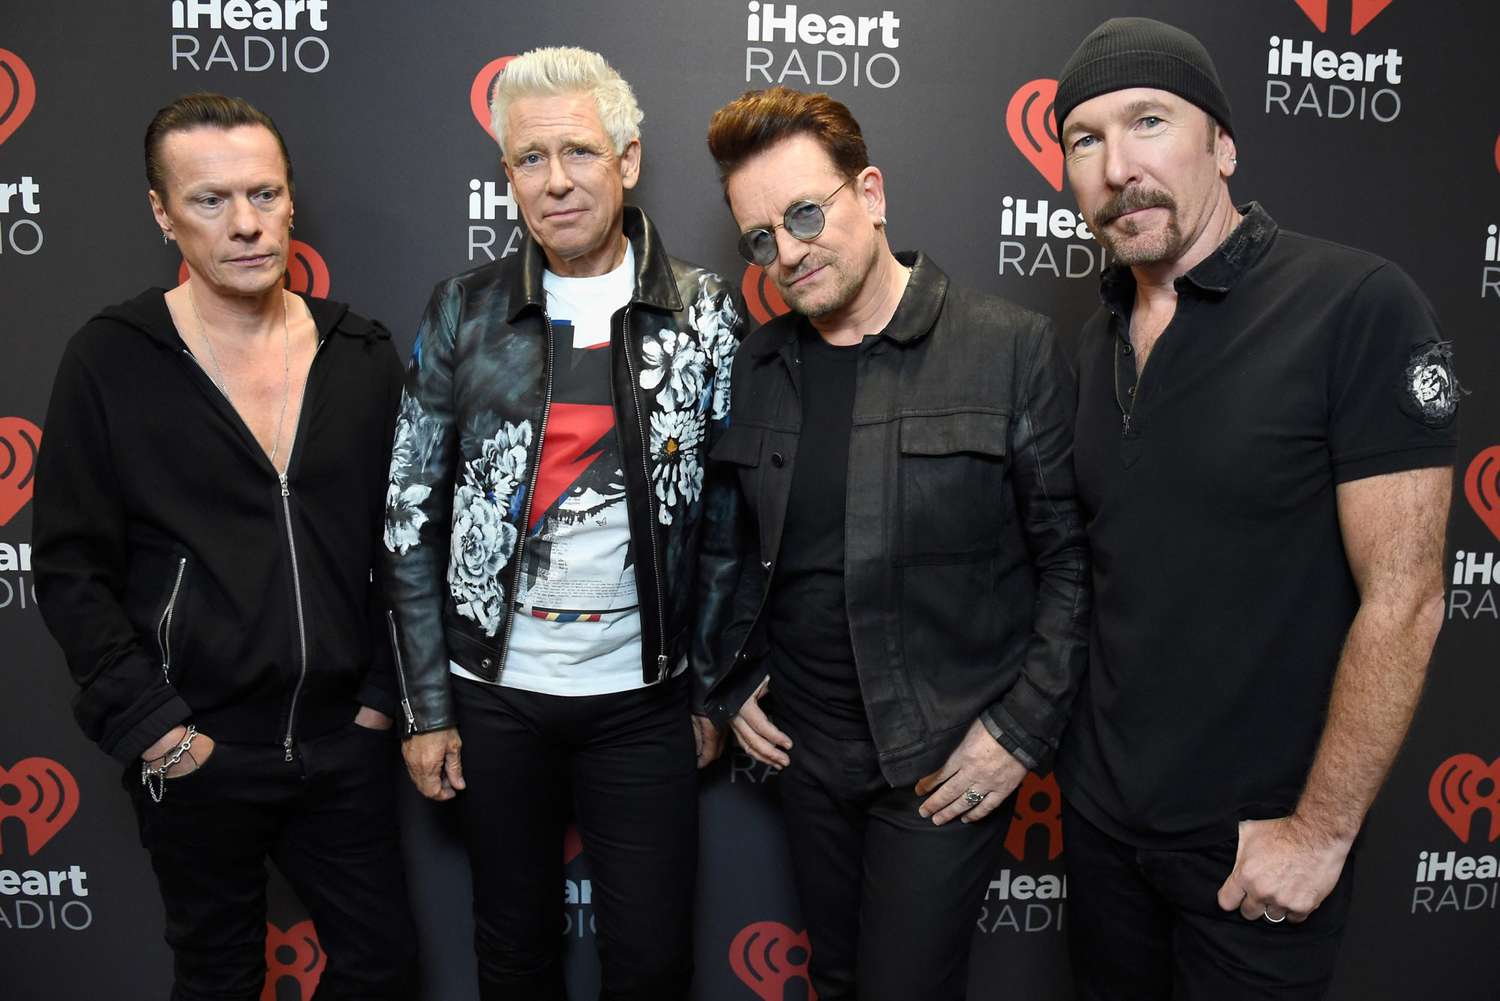 LAS VEGAS, NV - SEPTEMBER 23: (L-R) Recording artists Larry Mullen Jr., Adam Clayton, Bono, and The Edge of music group U2 pose at the 2016 iHeartRadio Music Festival at T-Mobile Arena on September 23, 2016 in Las Vegas, Nevada. (Photo by Kevin Mazur/WireImage)